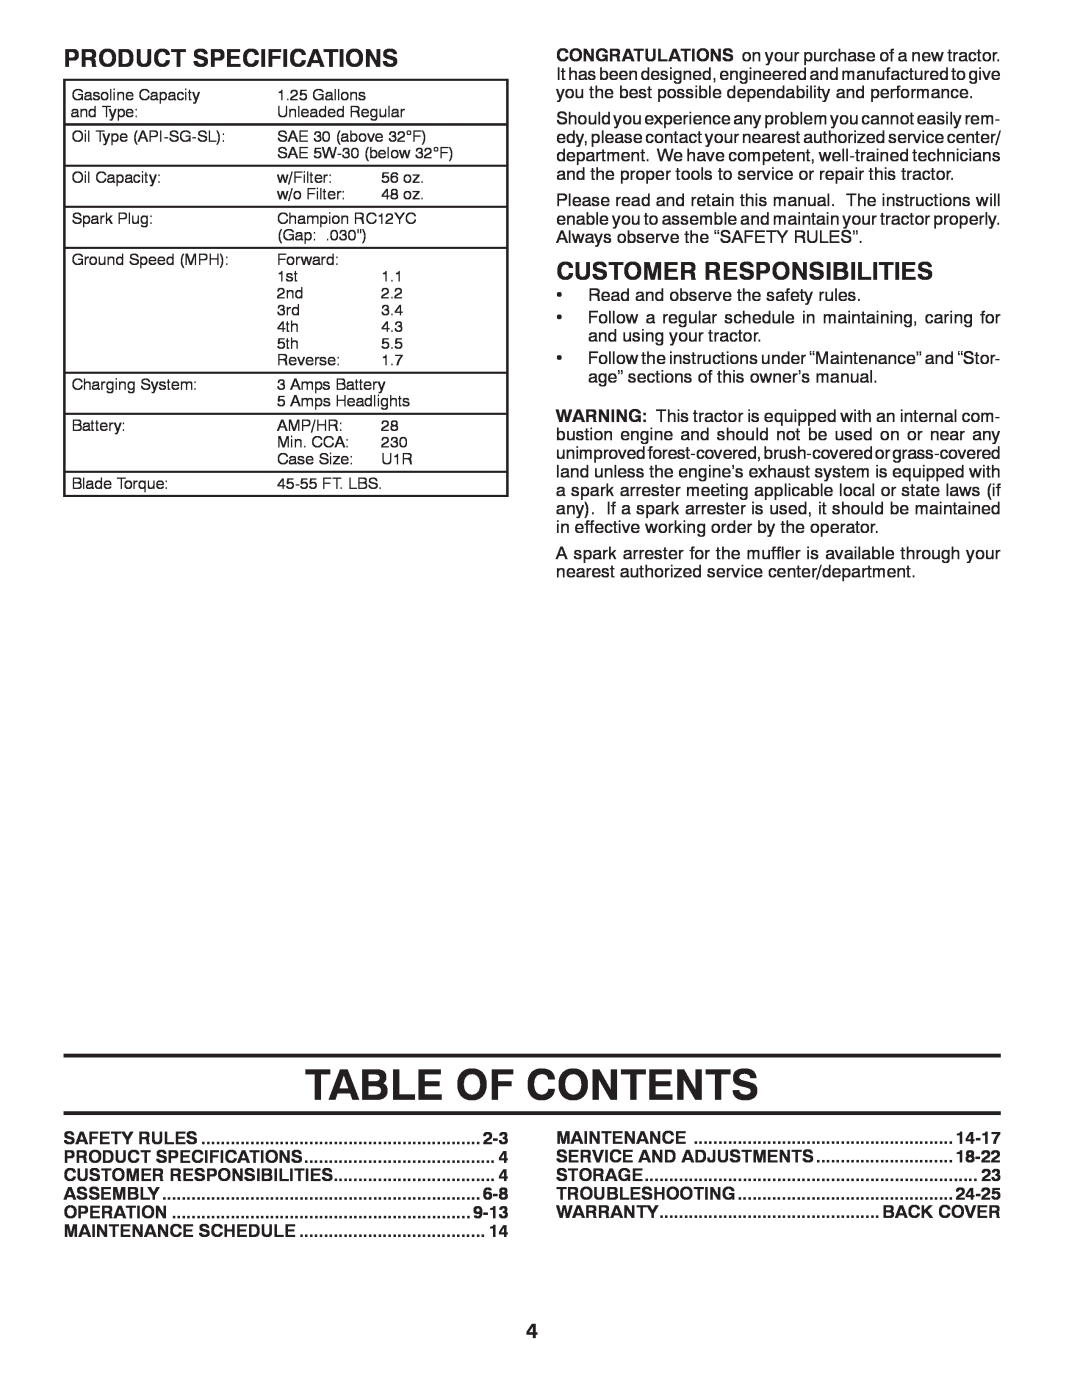 Poulan PP14538 manual Table Of Contents, Product Specifications, Customer Responsibilities 